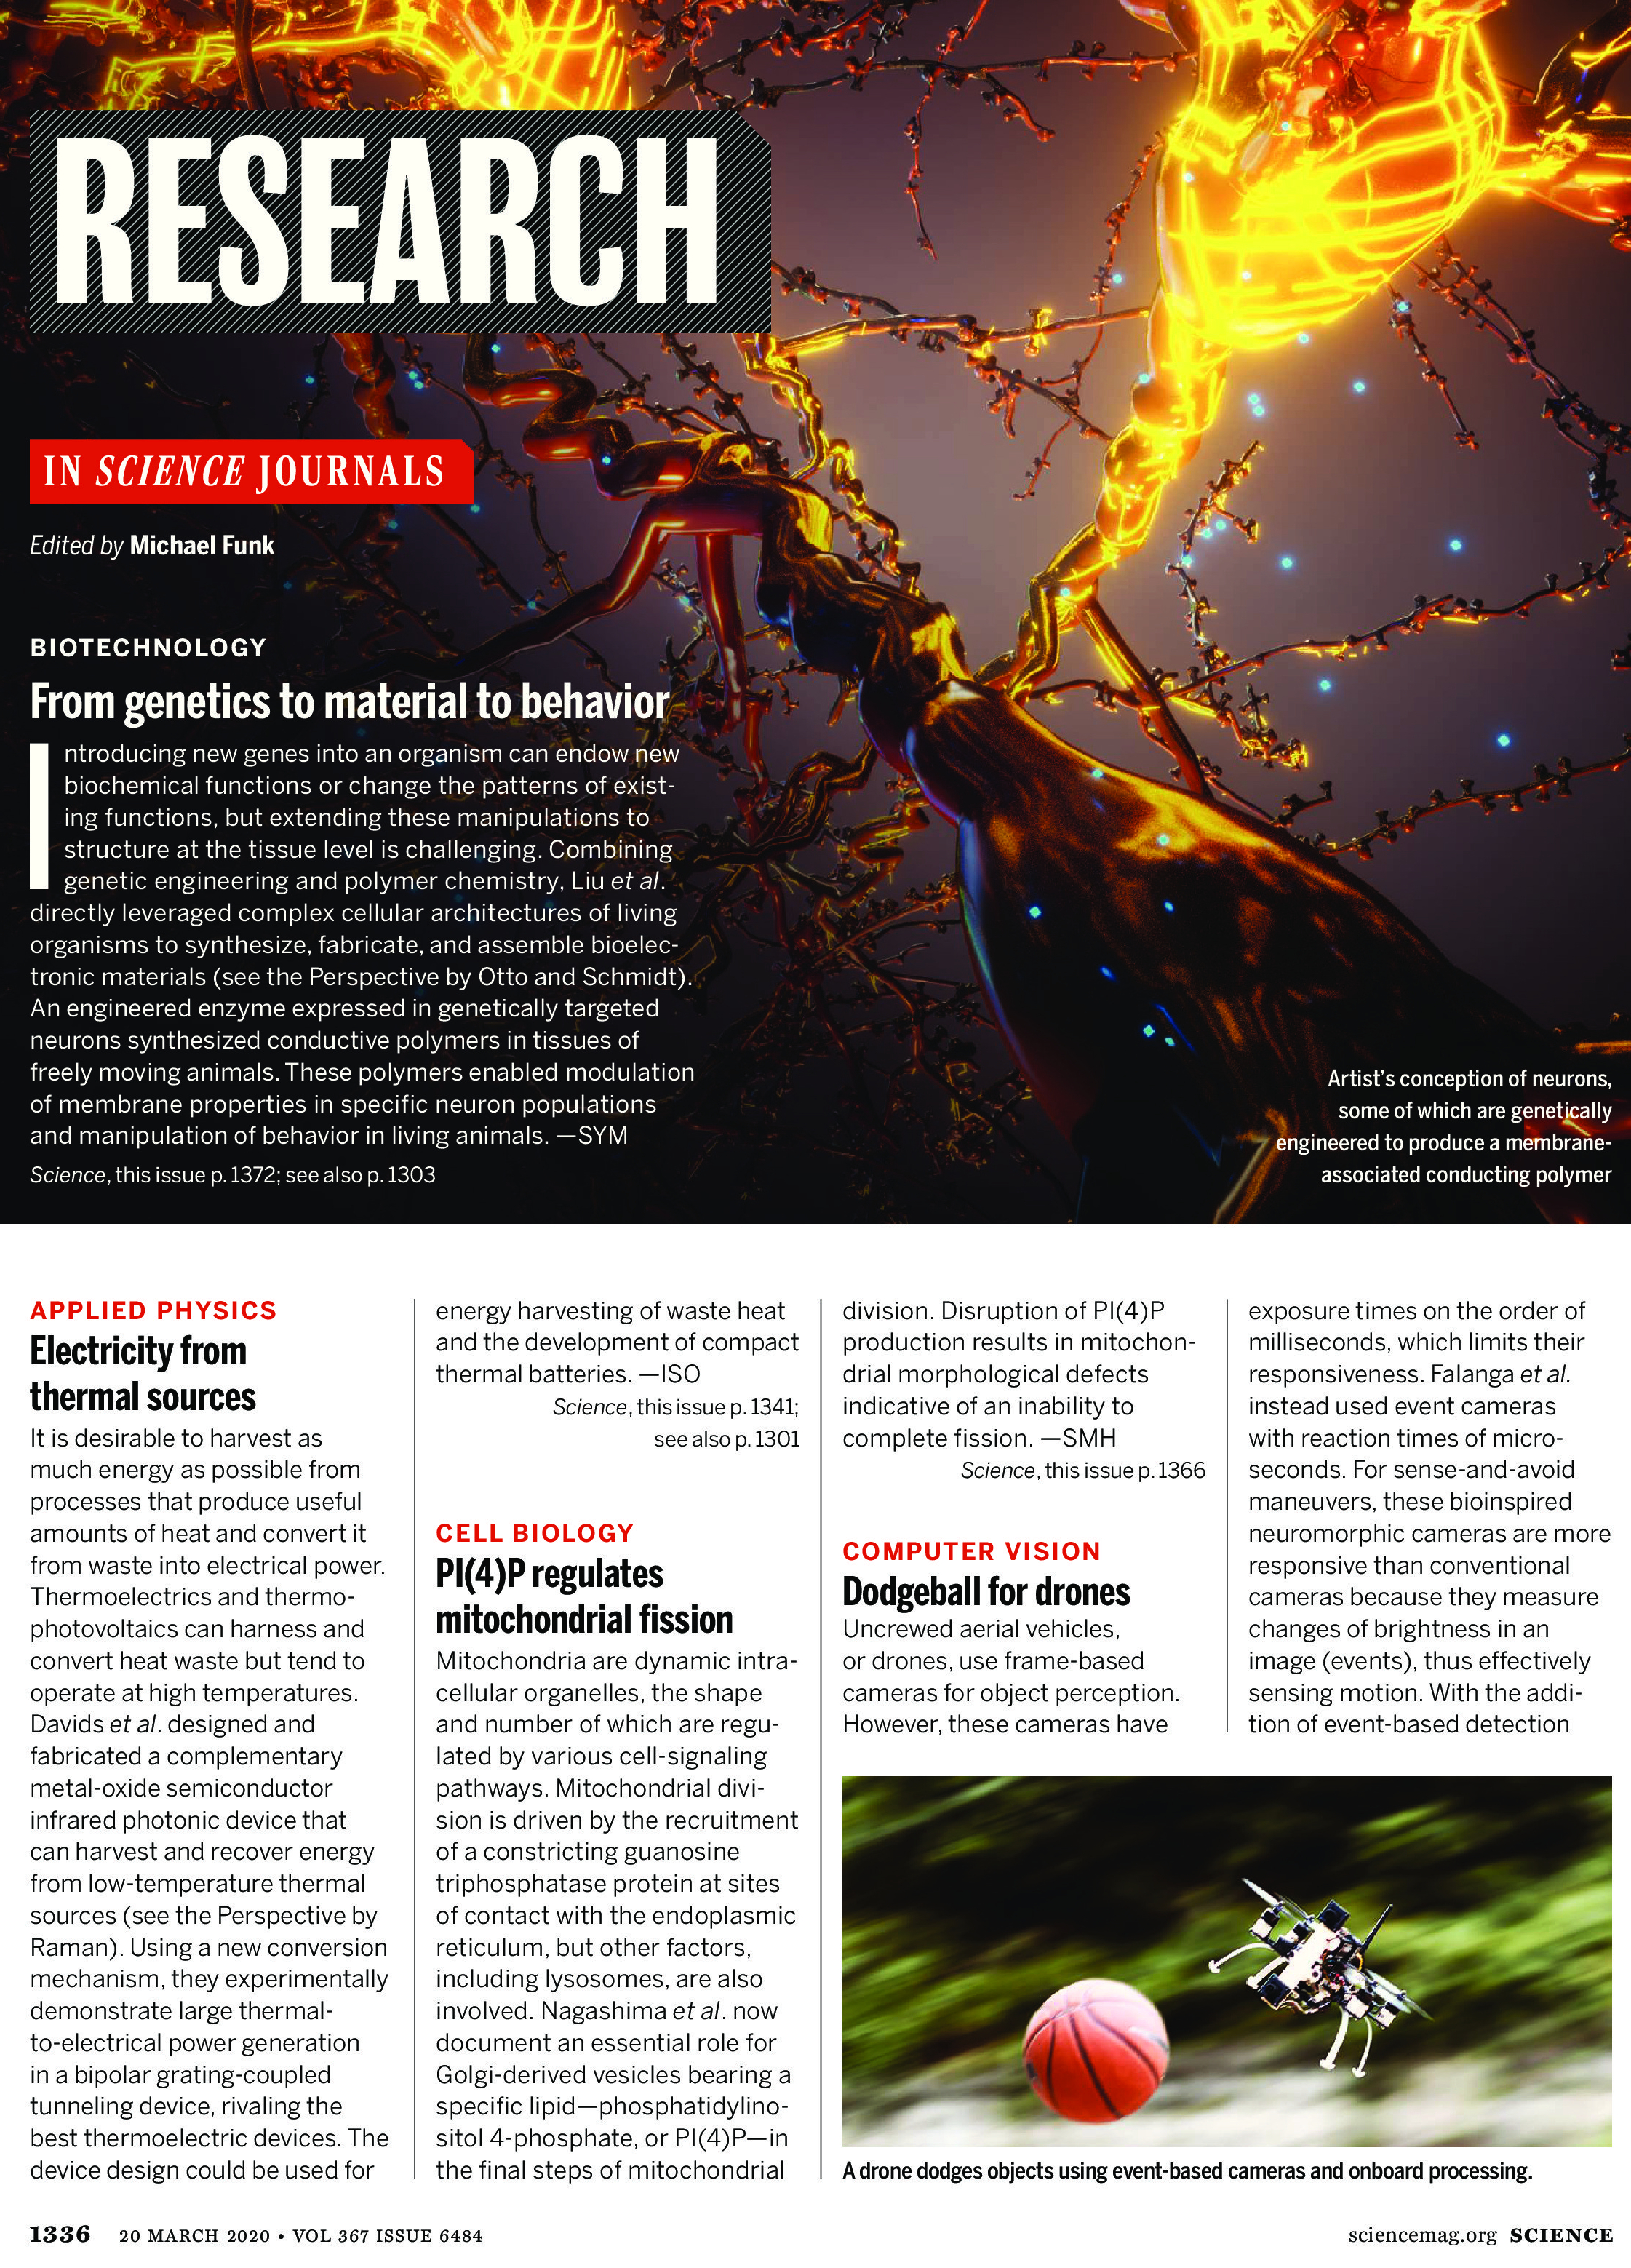 Science Magazine Journal March 20 2020 Research Highlights-page-0